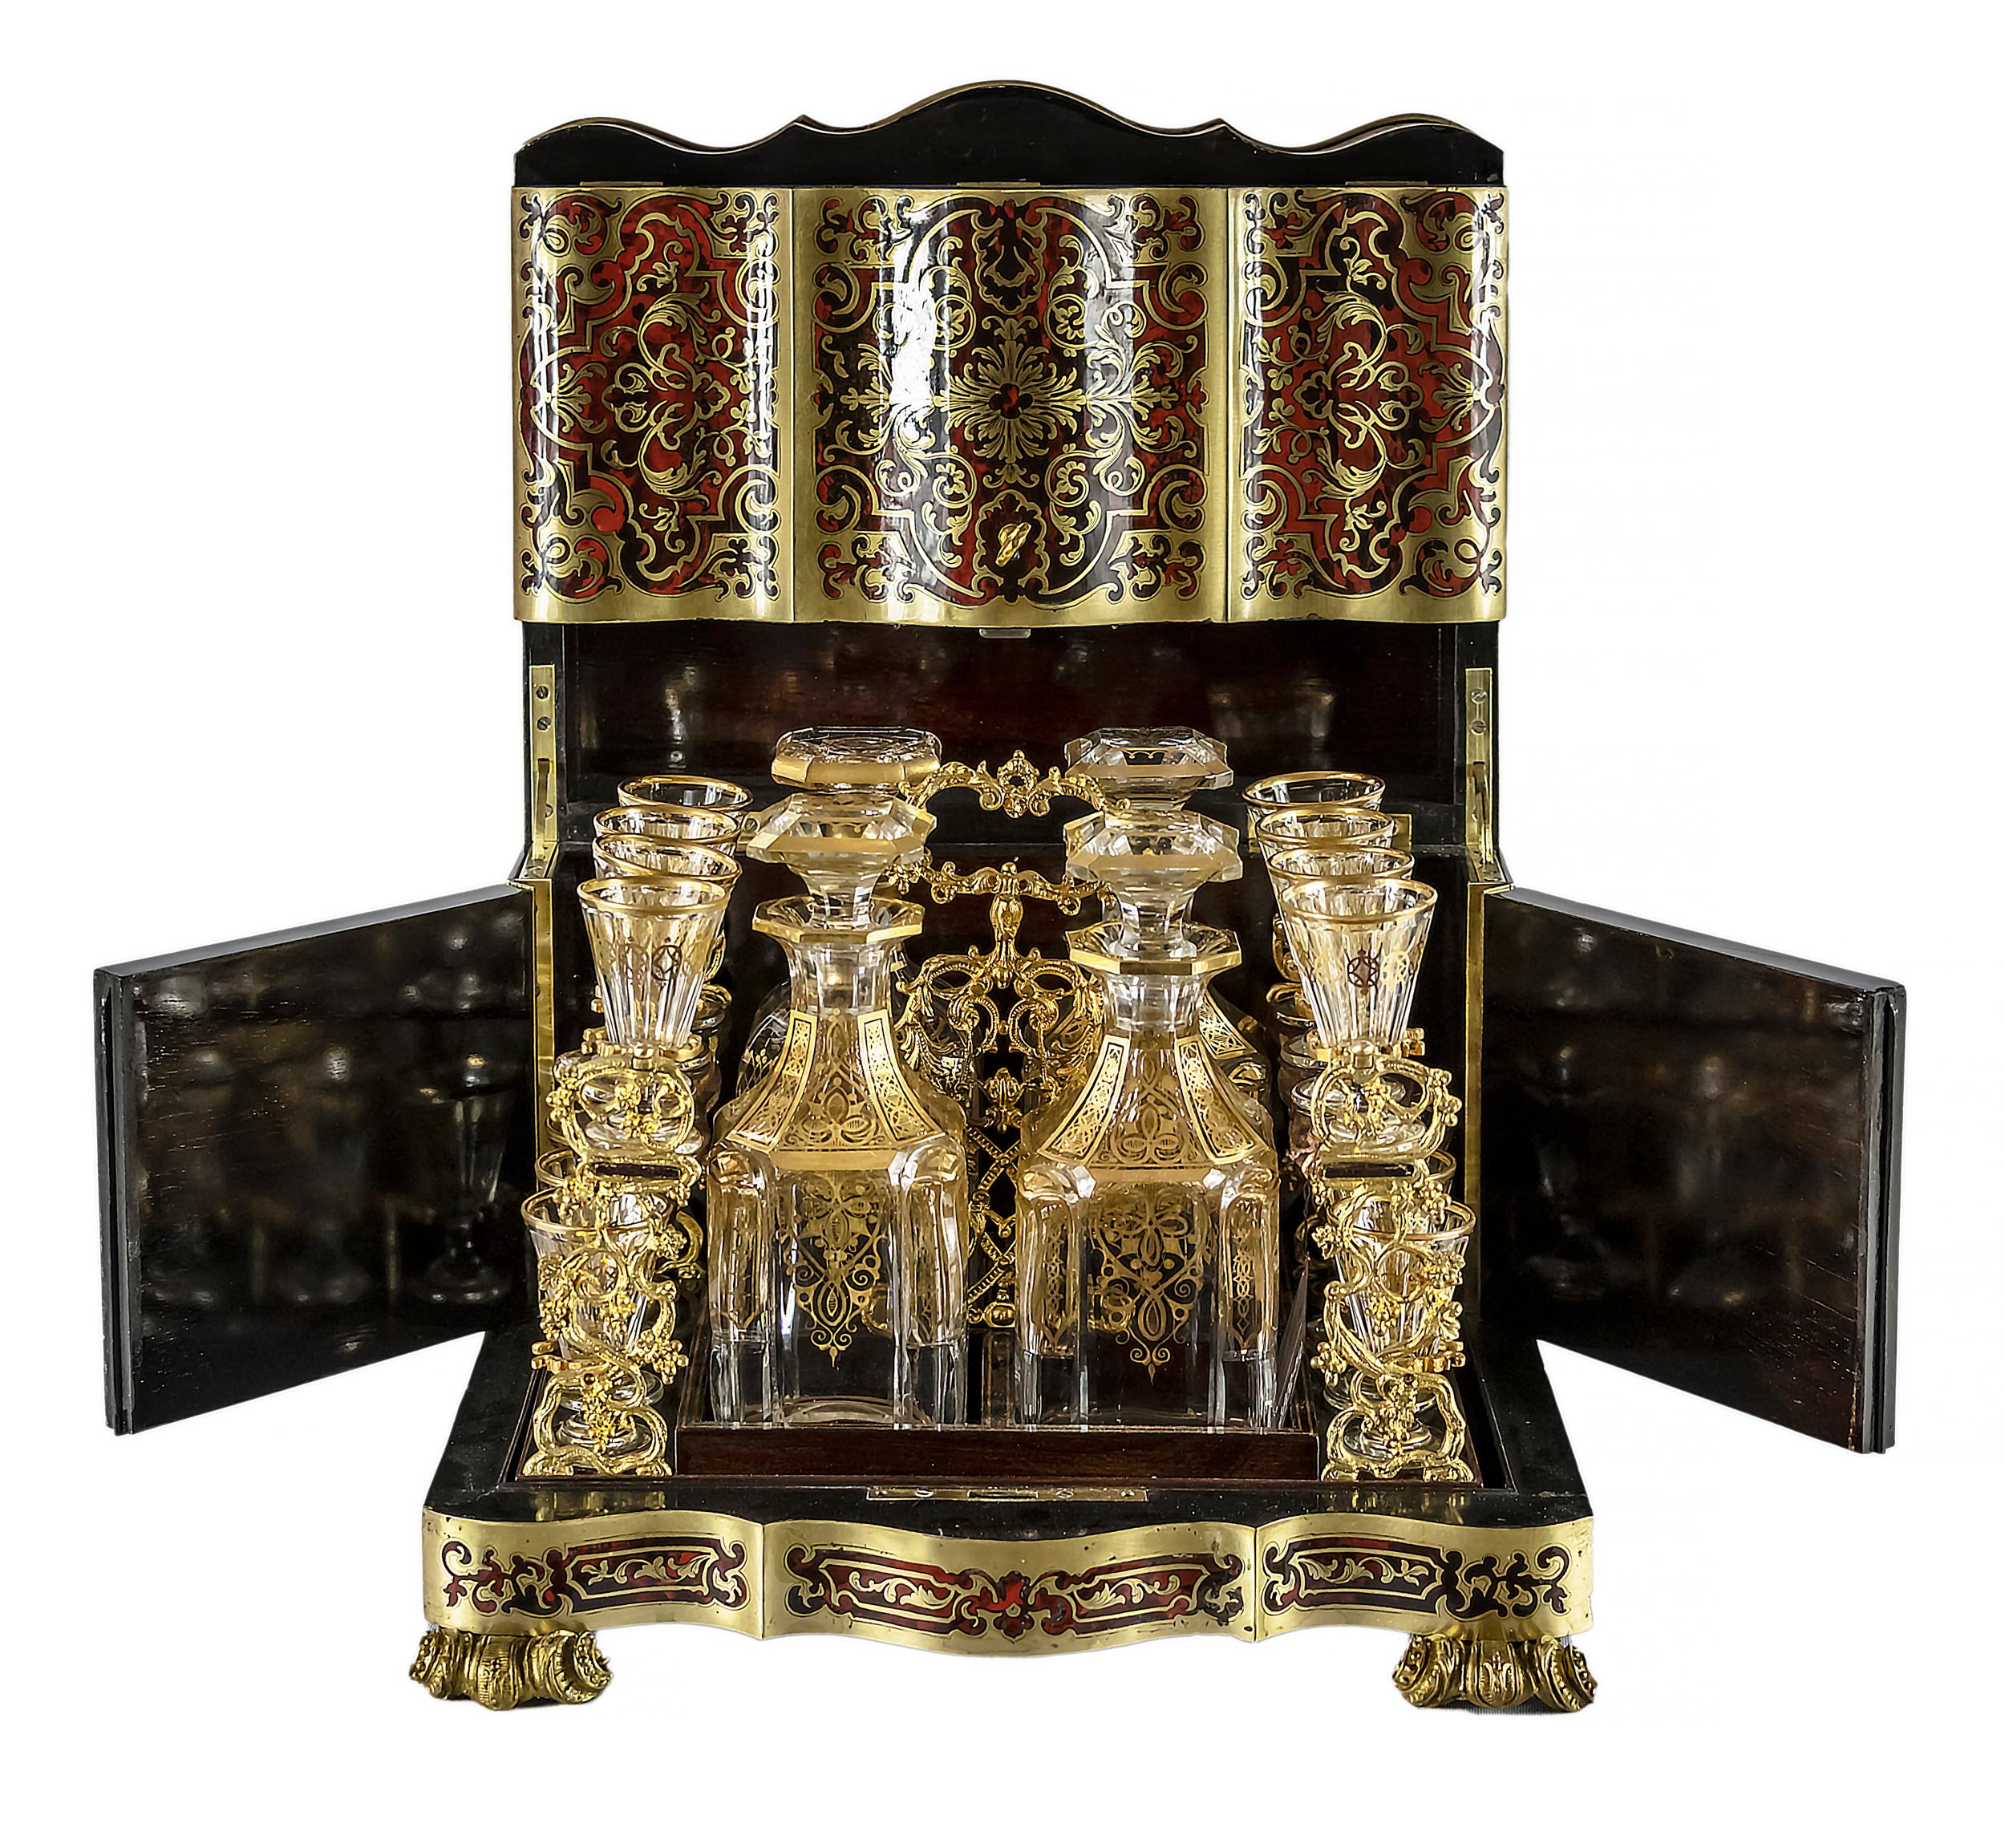 Antique French liqueur cave box with inlaid brass and and tortoise shell marquetry decor, a lift top door and swing side doors, polished surface, bronze legs.
Inside there is a wooden and bronze holder with four 4 crystal carafes and 16